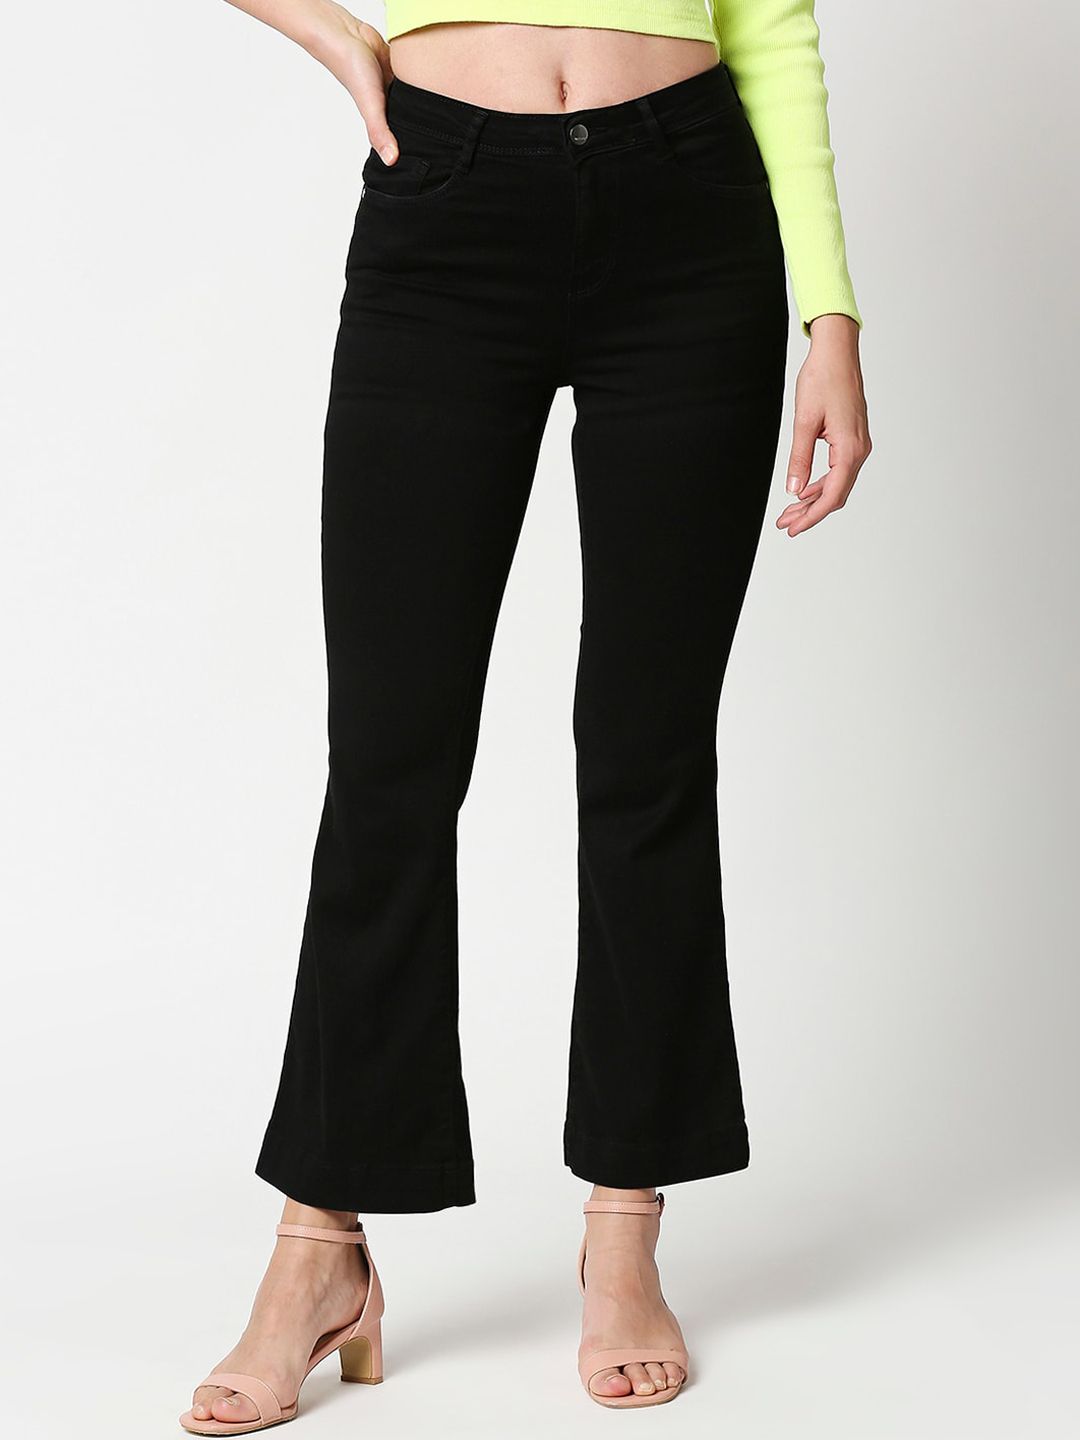 Kraus Jeans Black Flared High-Rise Jeans Price in India